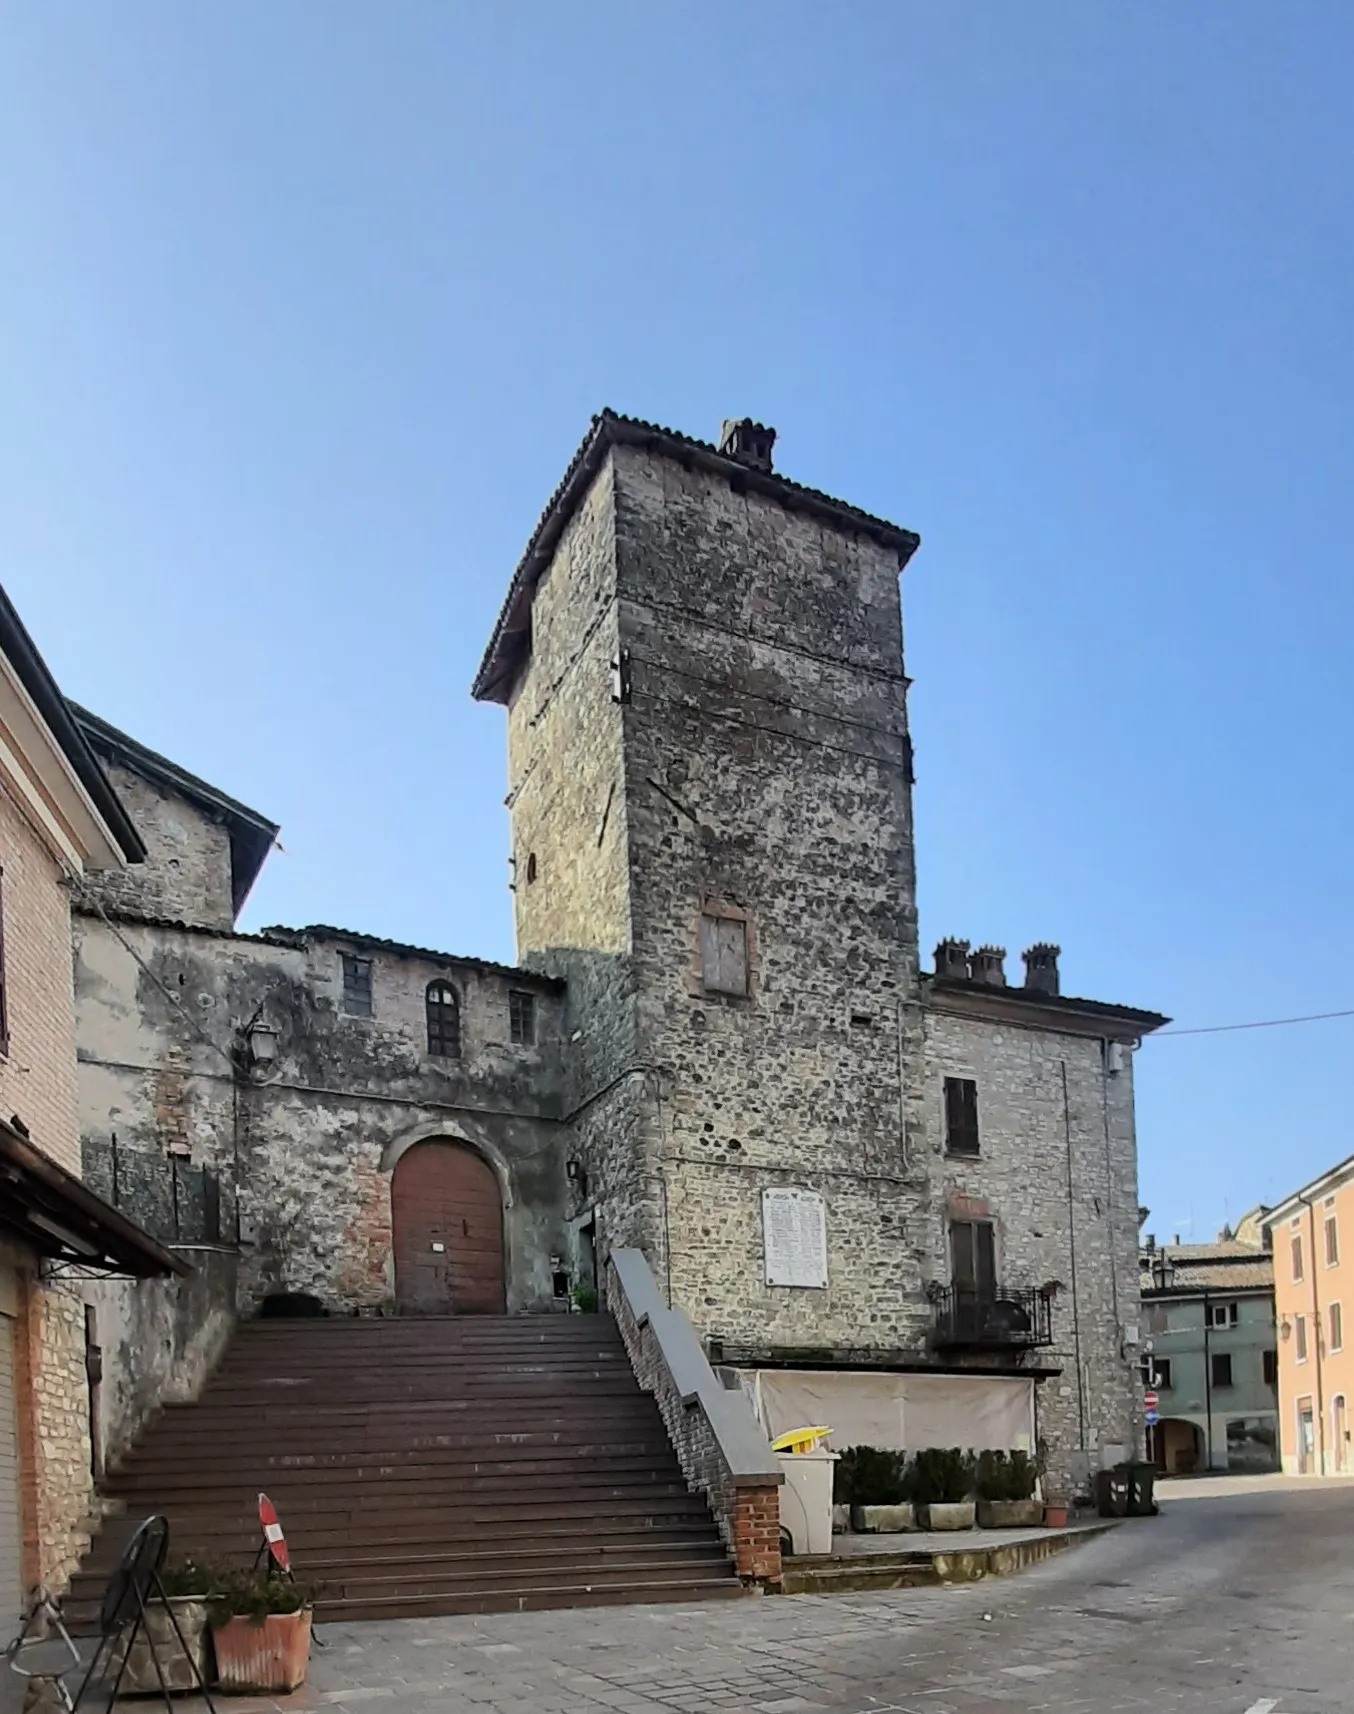 Photo showing: The entrance and the tower of the castle of Nibbiano, municipality of Alta Val Tidone, Piacenza, Italy